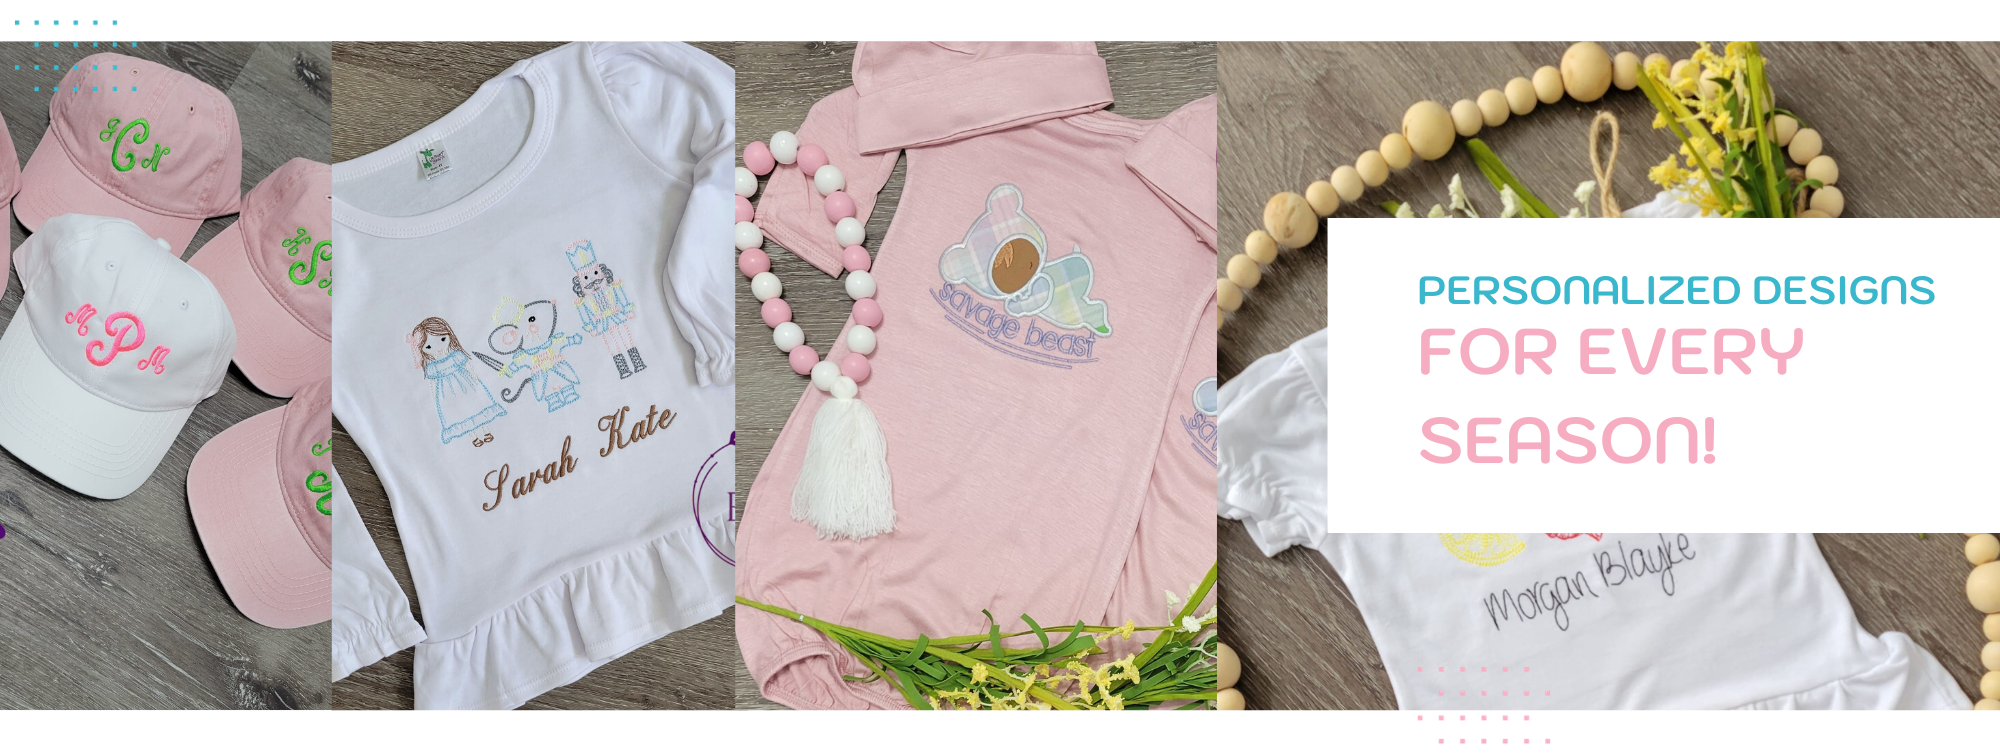 collage of custom embroidered baby clothing and hats